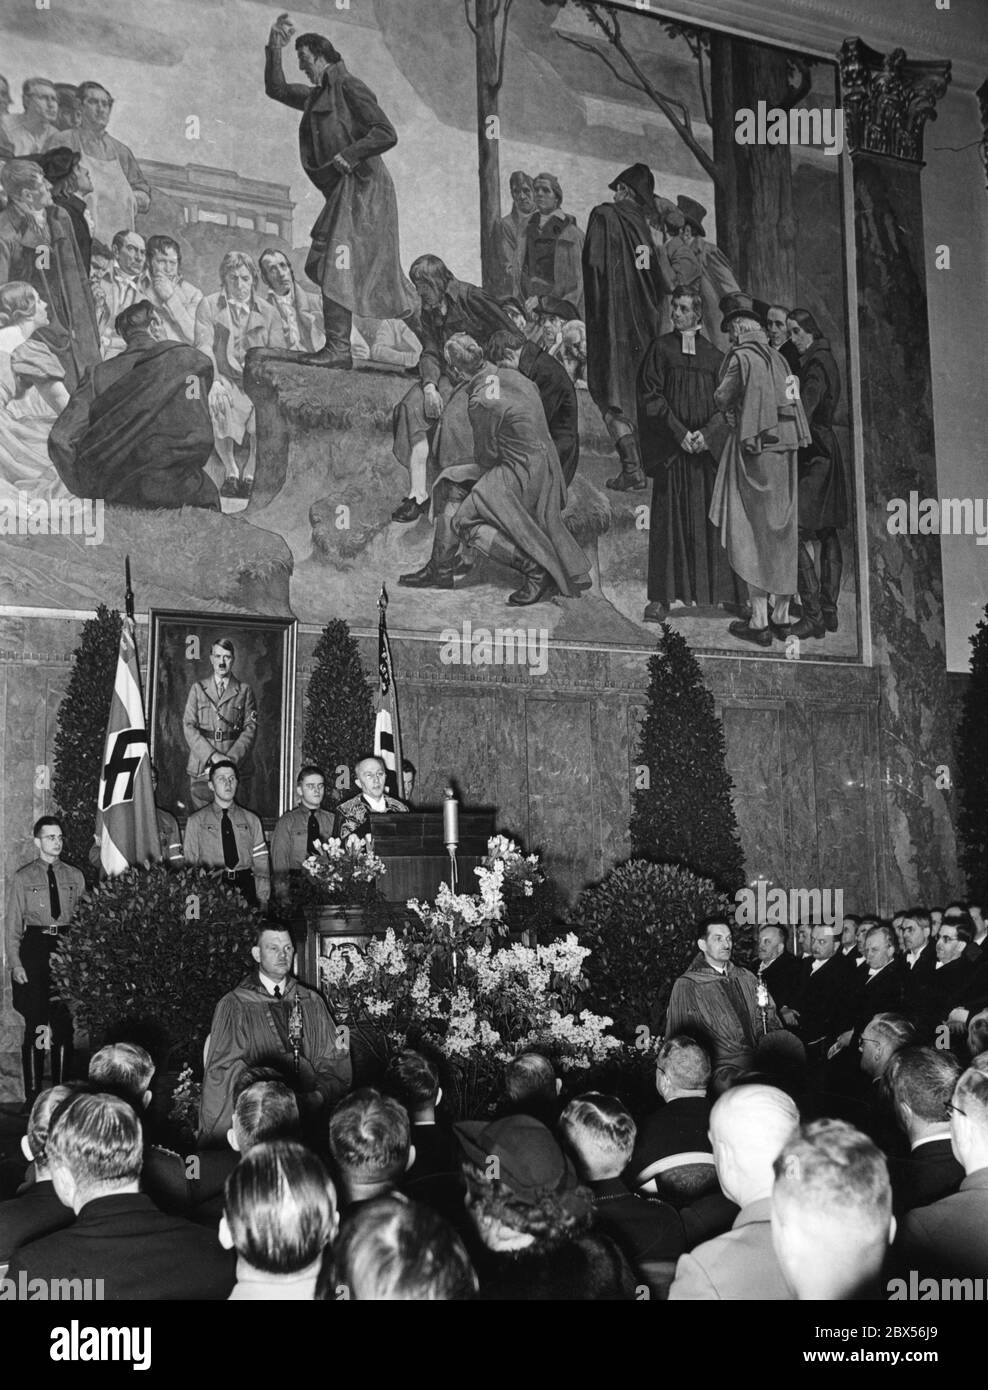 The Rector of the University of Berlin, Professor Willy Hoppe (at the lectern in gown) welcomes those present at a celebration marking the 5th anniversary of the  'Tag der nationalen Erhebung' (Day of National Rising) in the Neue Aula. Behind him there is a portrait of Adolf Hitler. Stock Photo